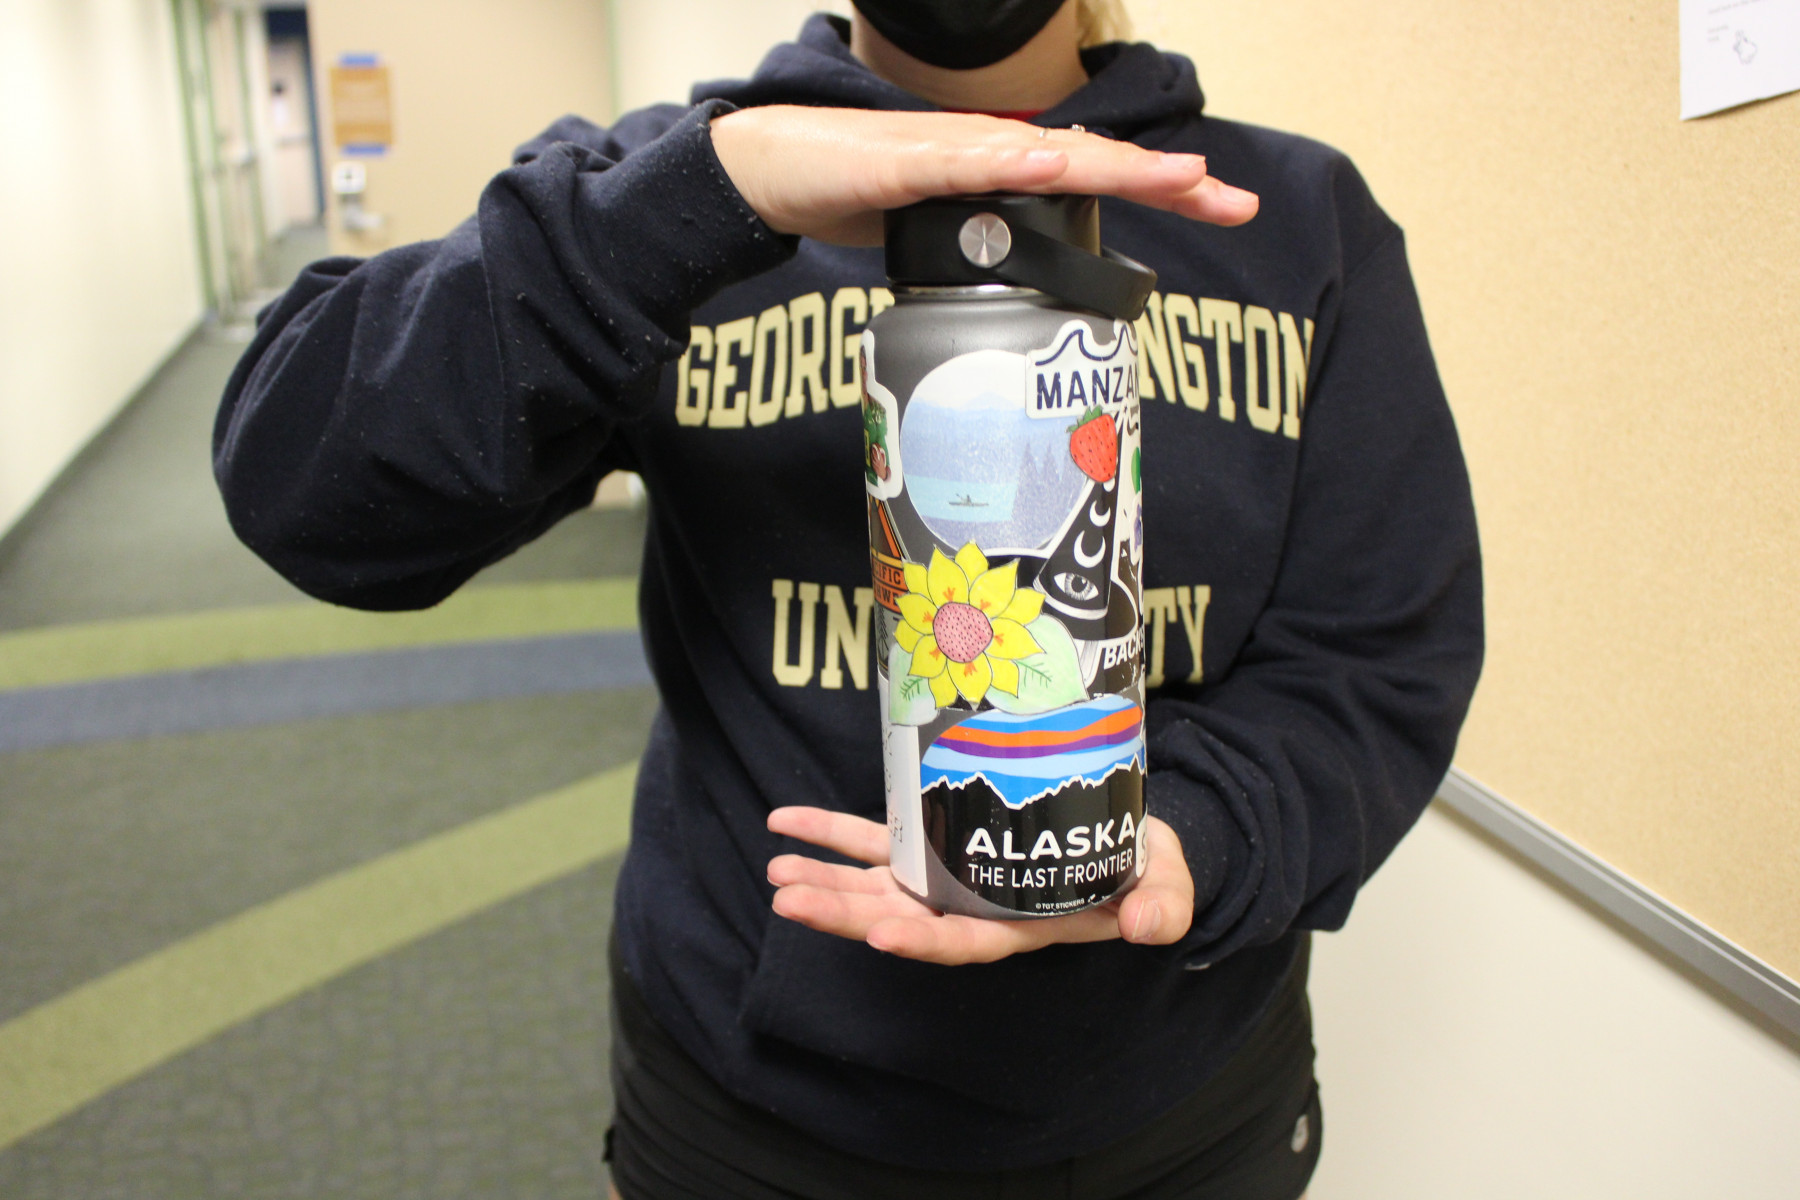 A person in a navy George Washington University sweatshirt, head not pictured, holds a reusable plastic water bottle with many stickers.